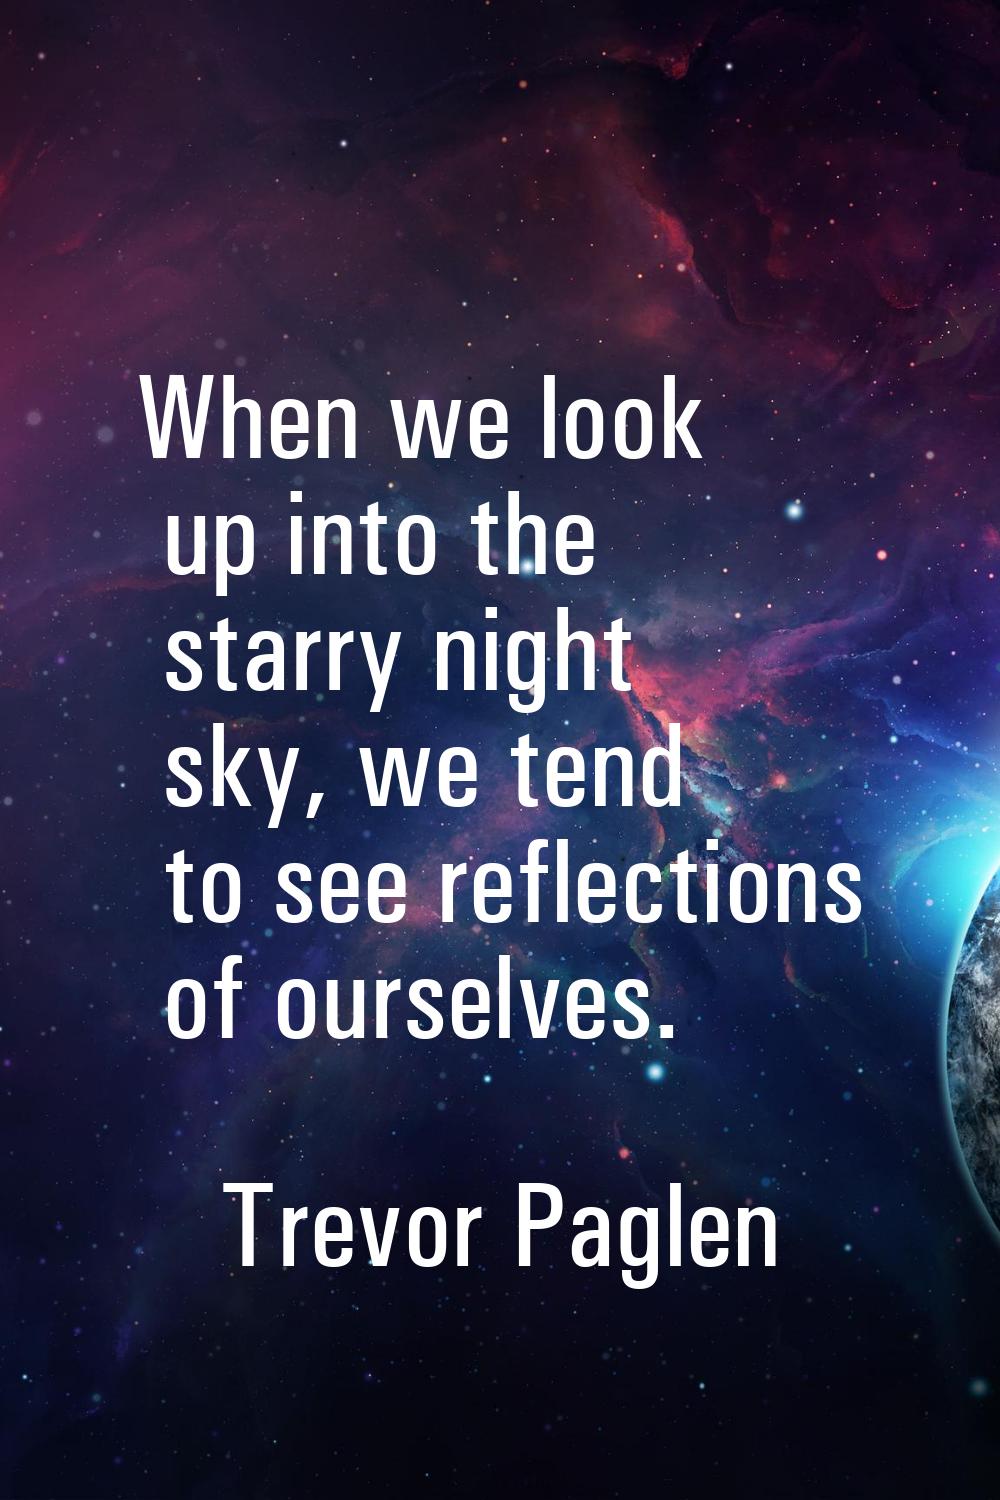 When we look up into the starry night sky, we tend to see reflections of ourselves.